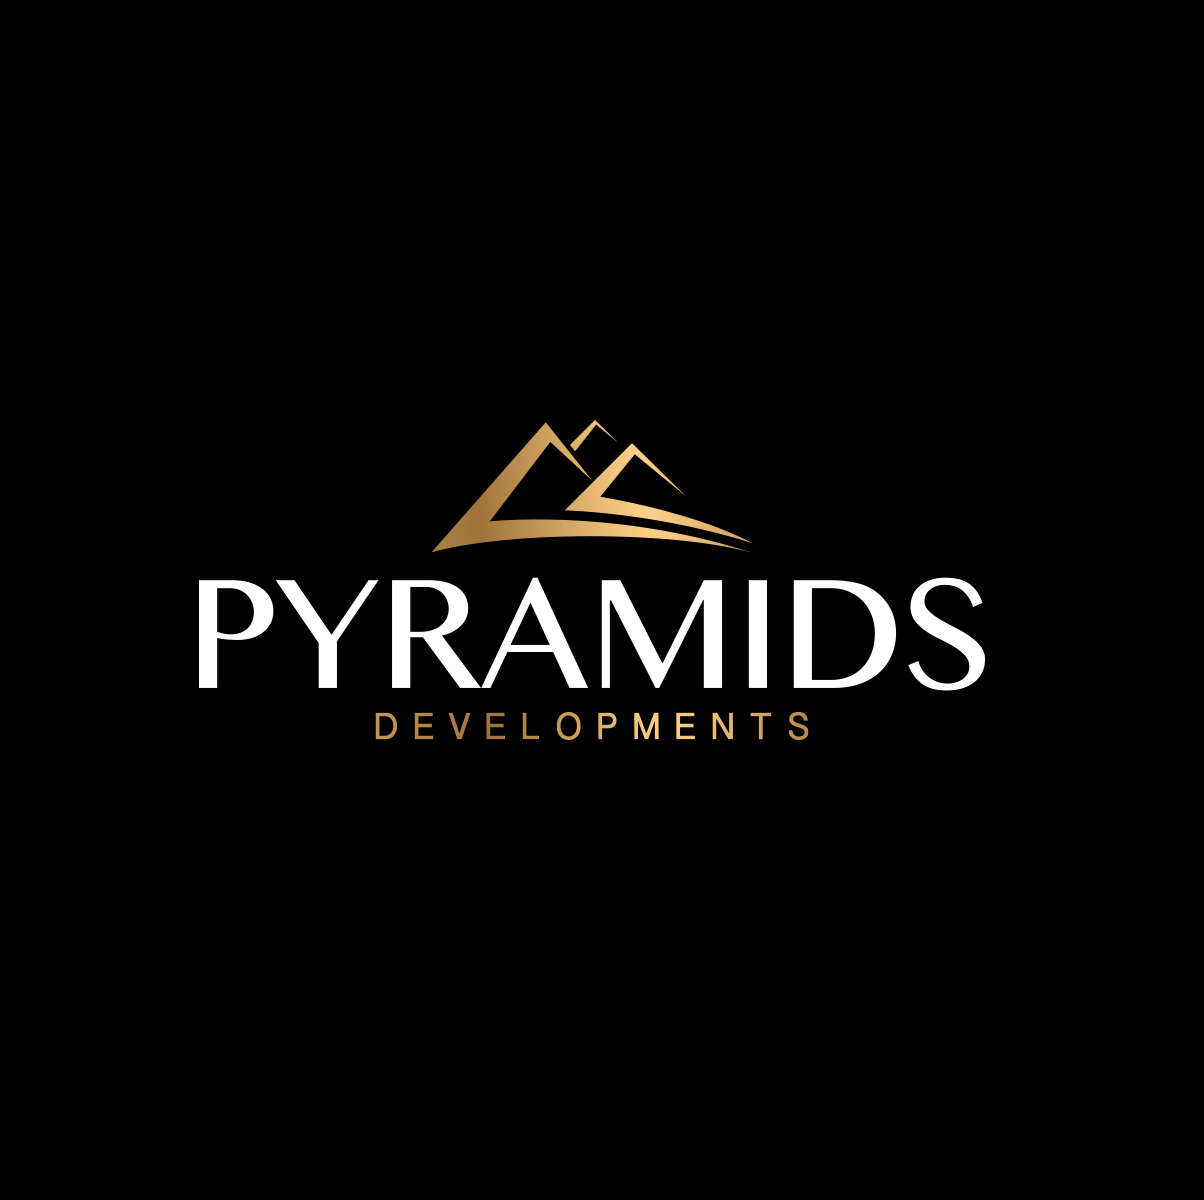 Pyramids For Real Estate Investment